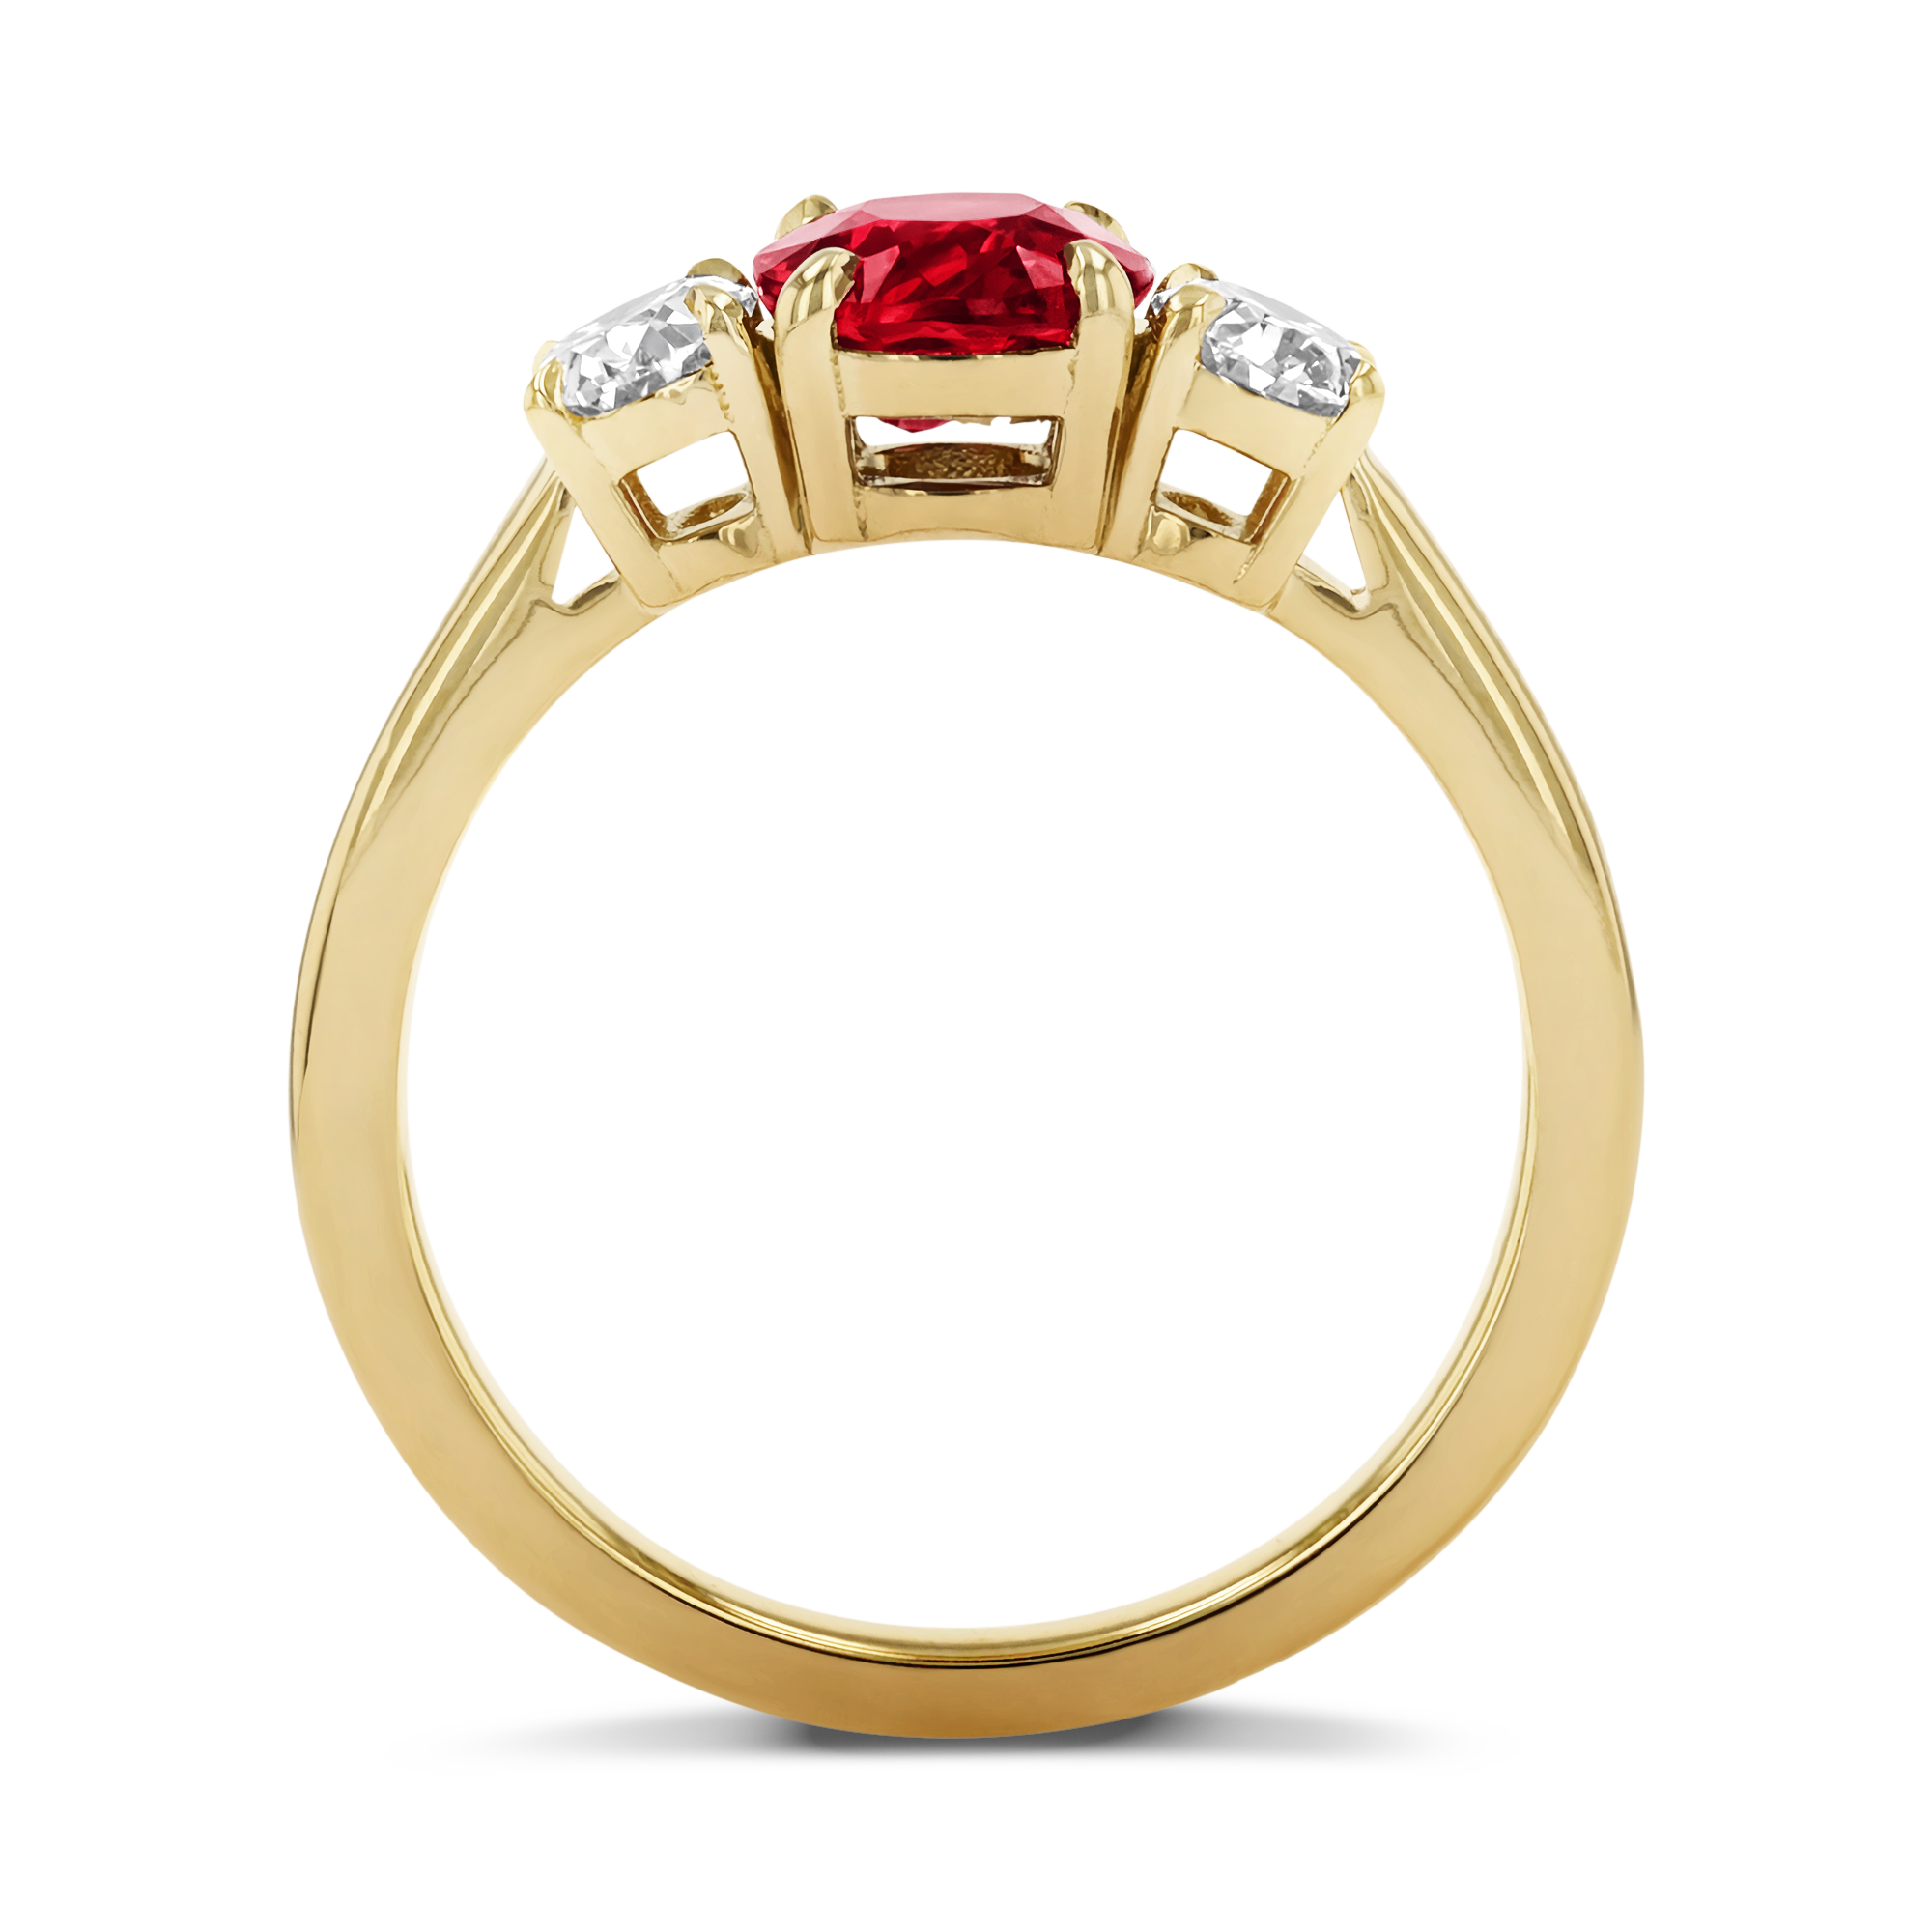 Mozambique 1.53ct Ruby and Diamond Three Stone Ring Oval Cut, Claw Set_3